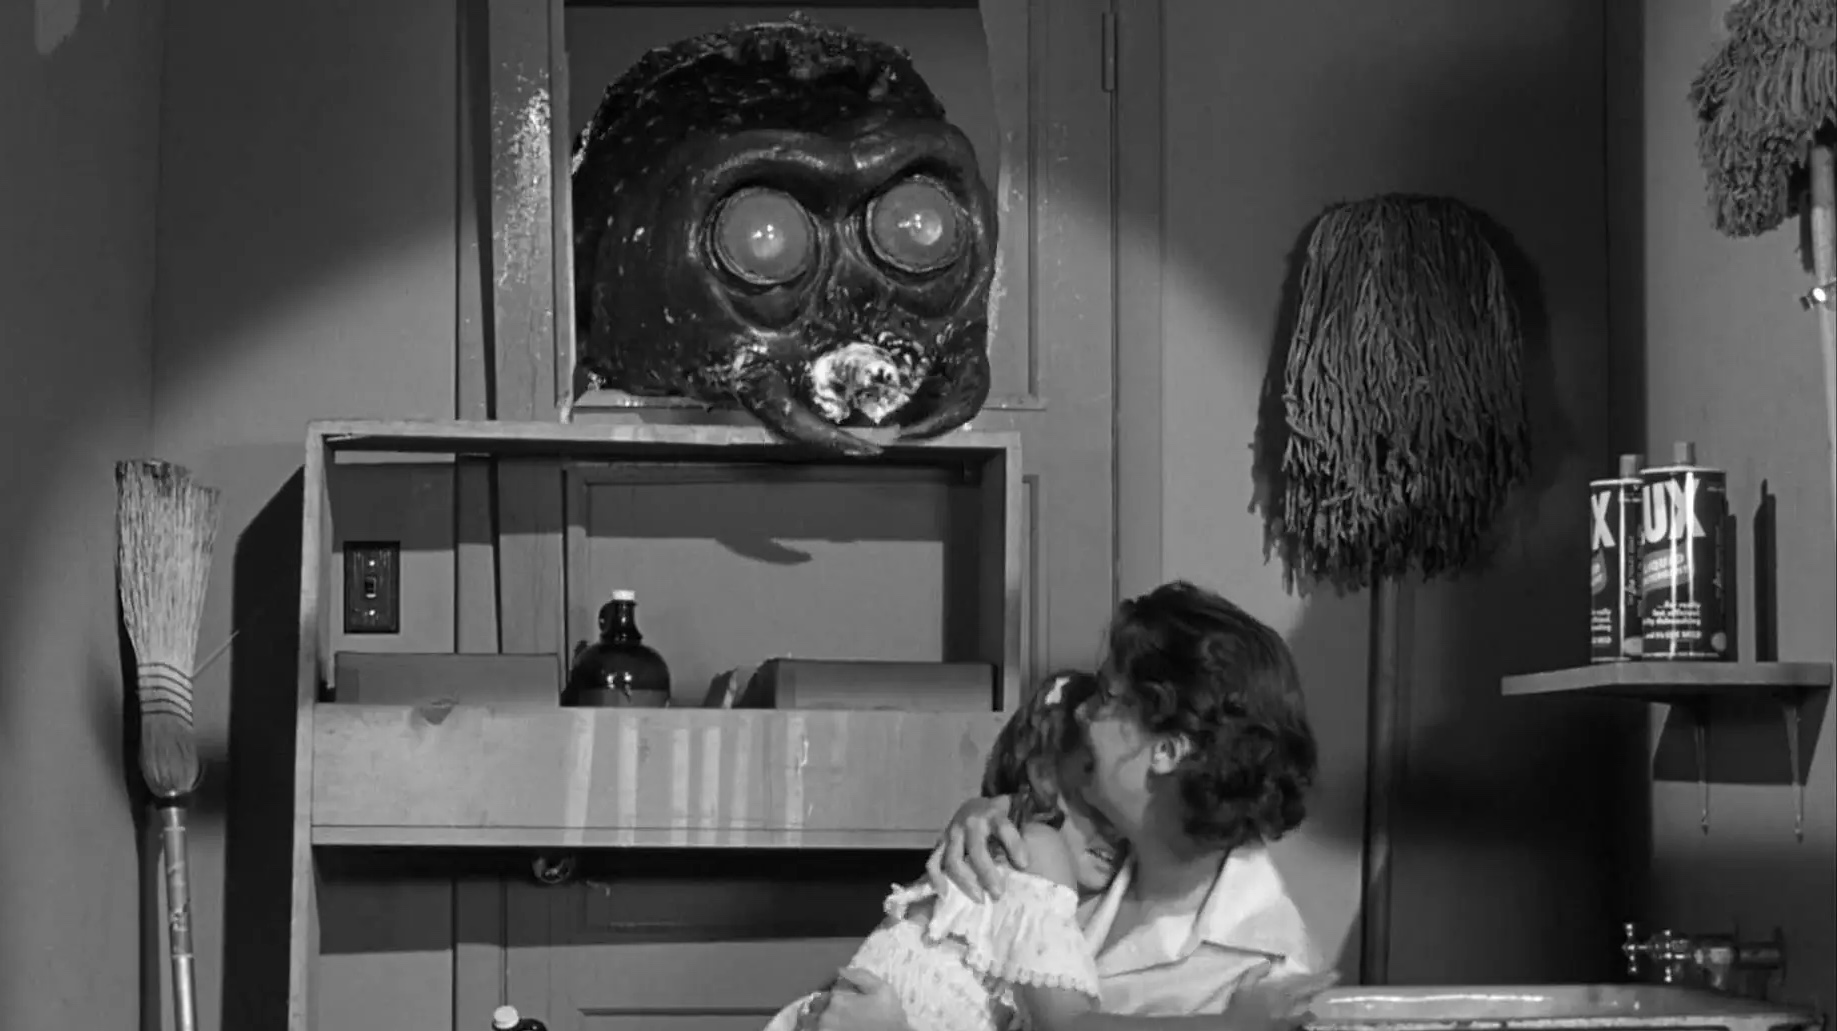 A black and white screenshot from a film. There is a large insect head poking through the window of a kitchen as a woman clutching her young child recoils.